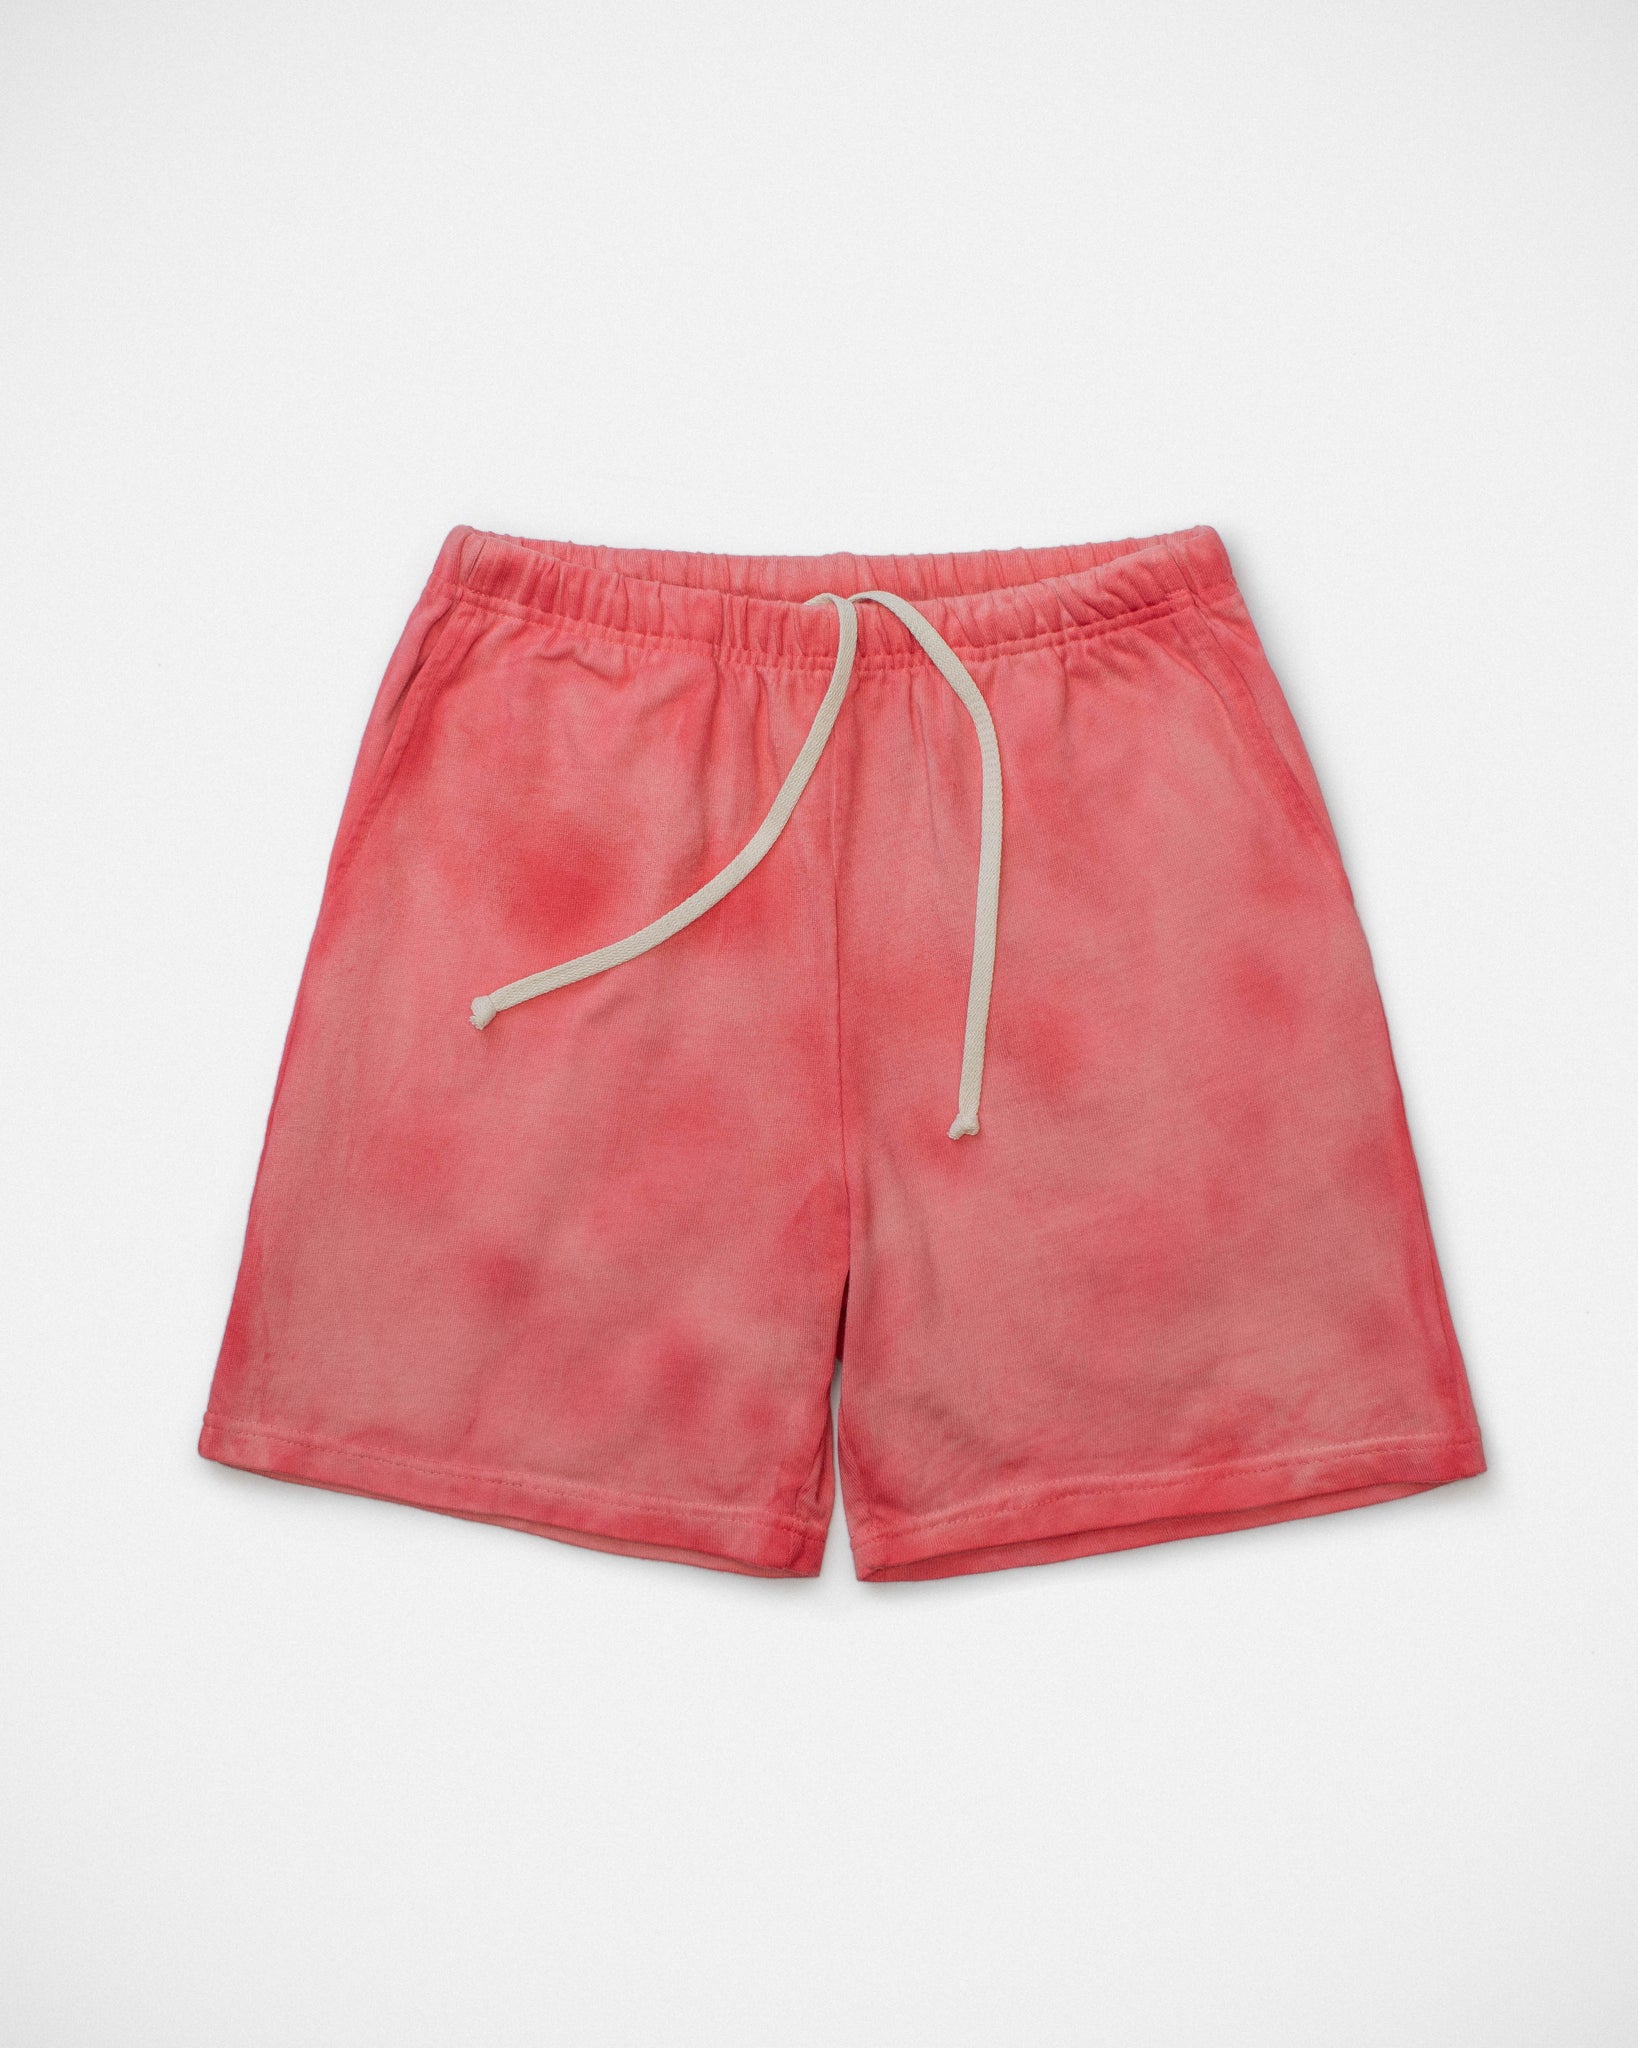 Gym Shorts - Sun faded Red